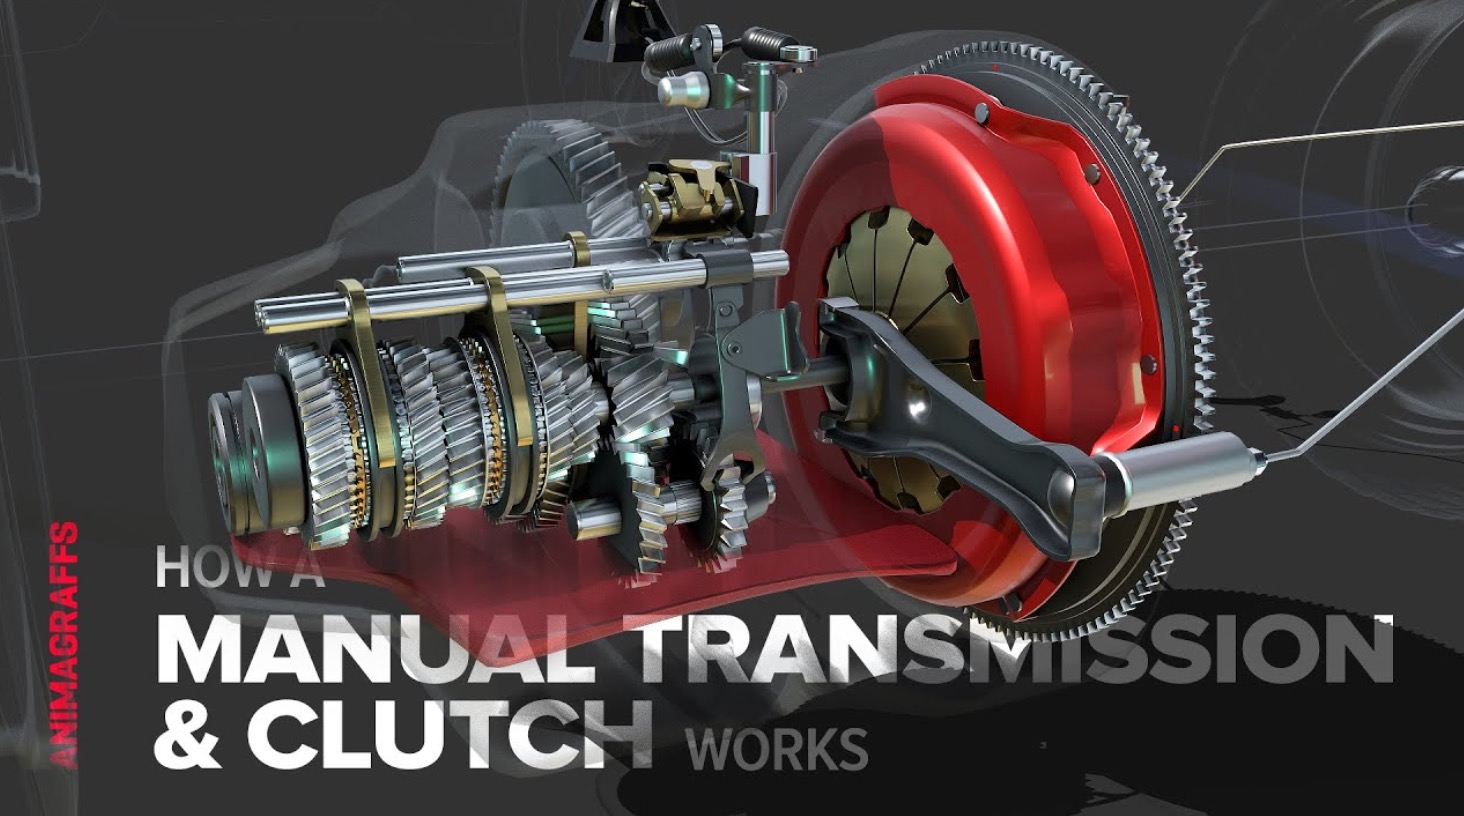 The Best Explanation For How A Manual Transmission And Clutch Works | Digg